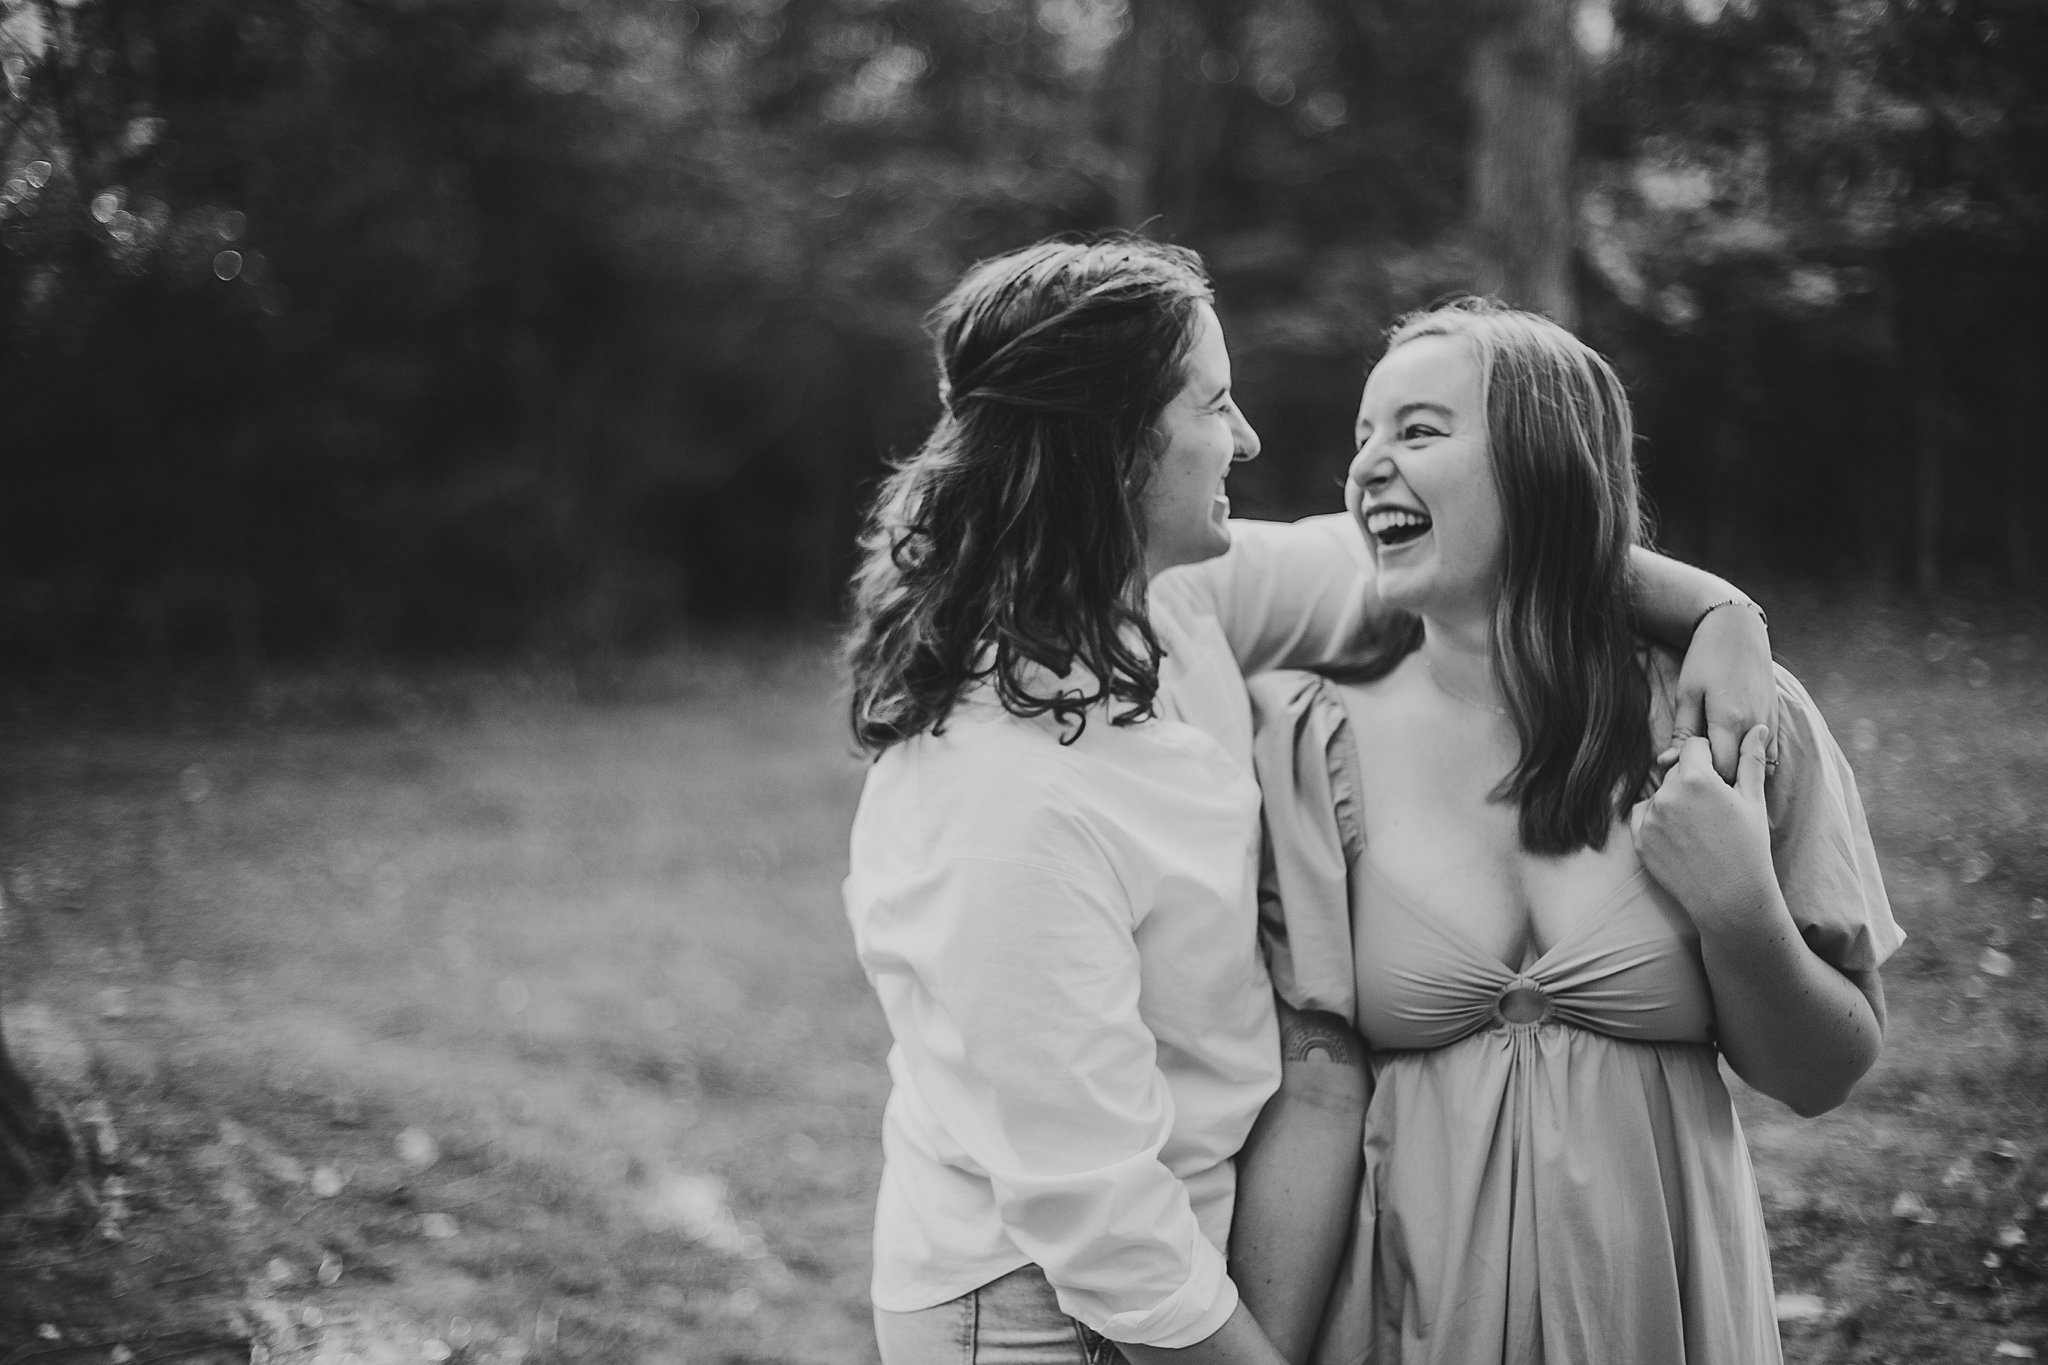 Samantha Mitchell, an LGBTQ Engagement photographer captures two women at Prophet's Rock in Indiana. The two women are snuggling together in a forest.